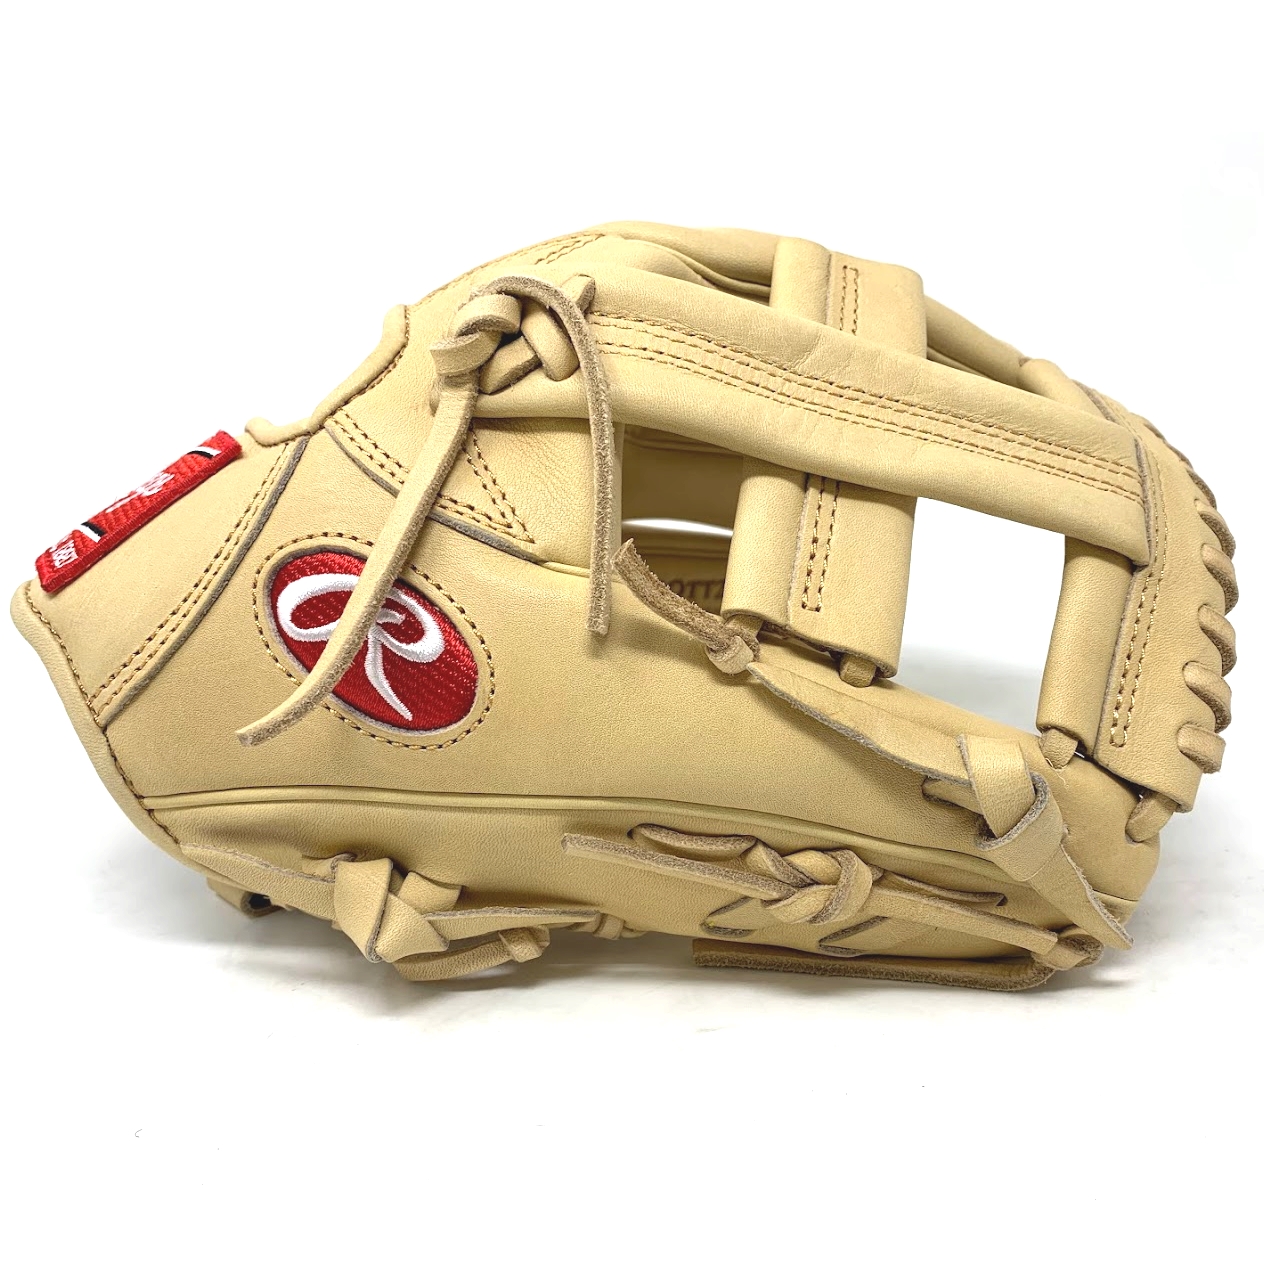 rawlings-heart-of-the-hide-pro-tt2-baseball-glove-11-5-camel-camel-laces-right-hand-throw PROTT2-CC-RightHandThrow Rawlings  <p>Take the field with this limited production Rawlings Heart of the